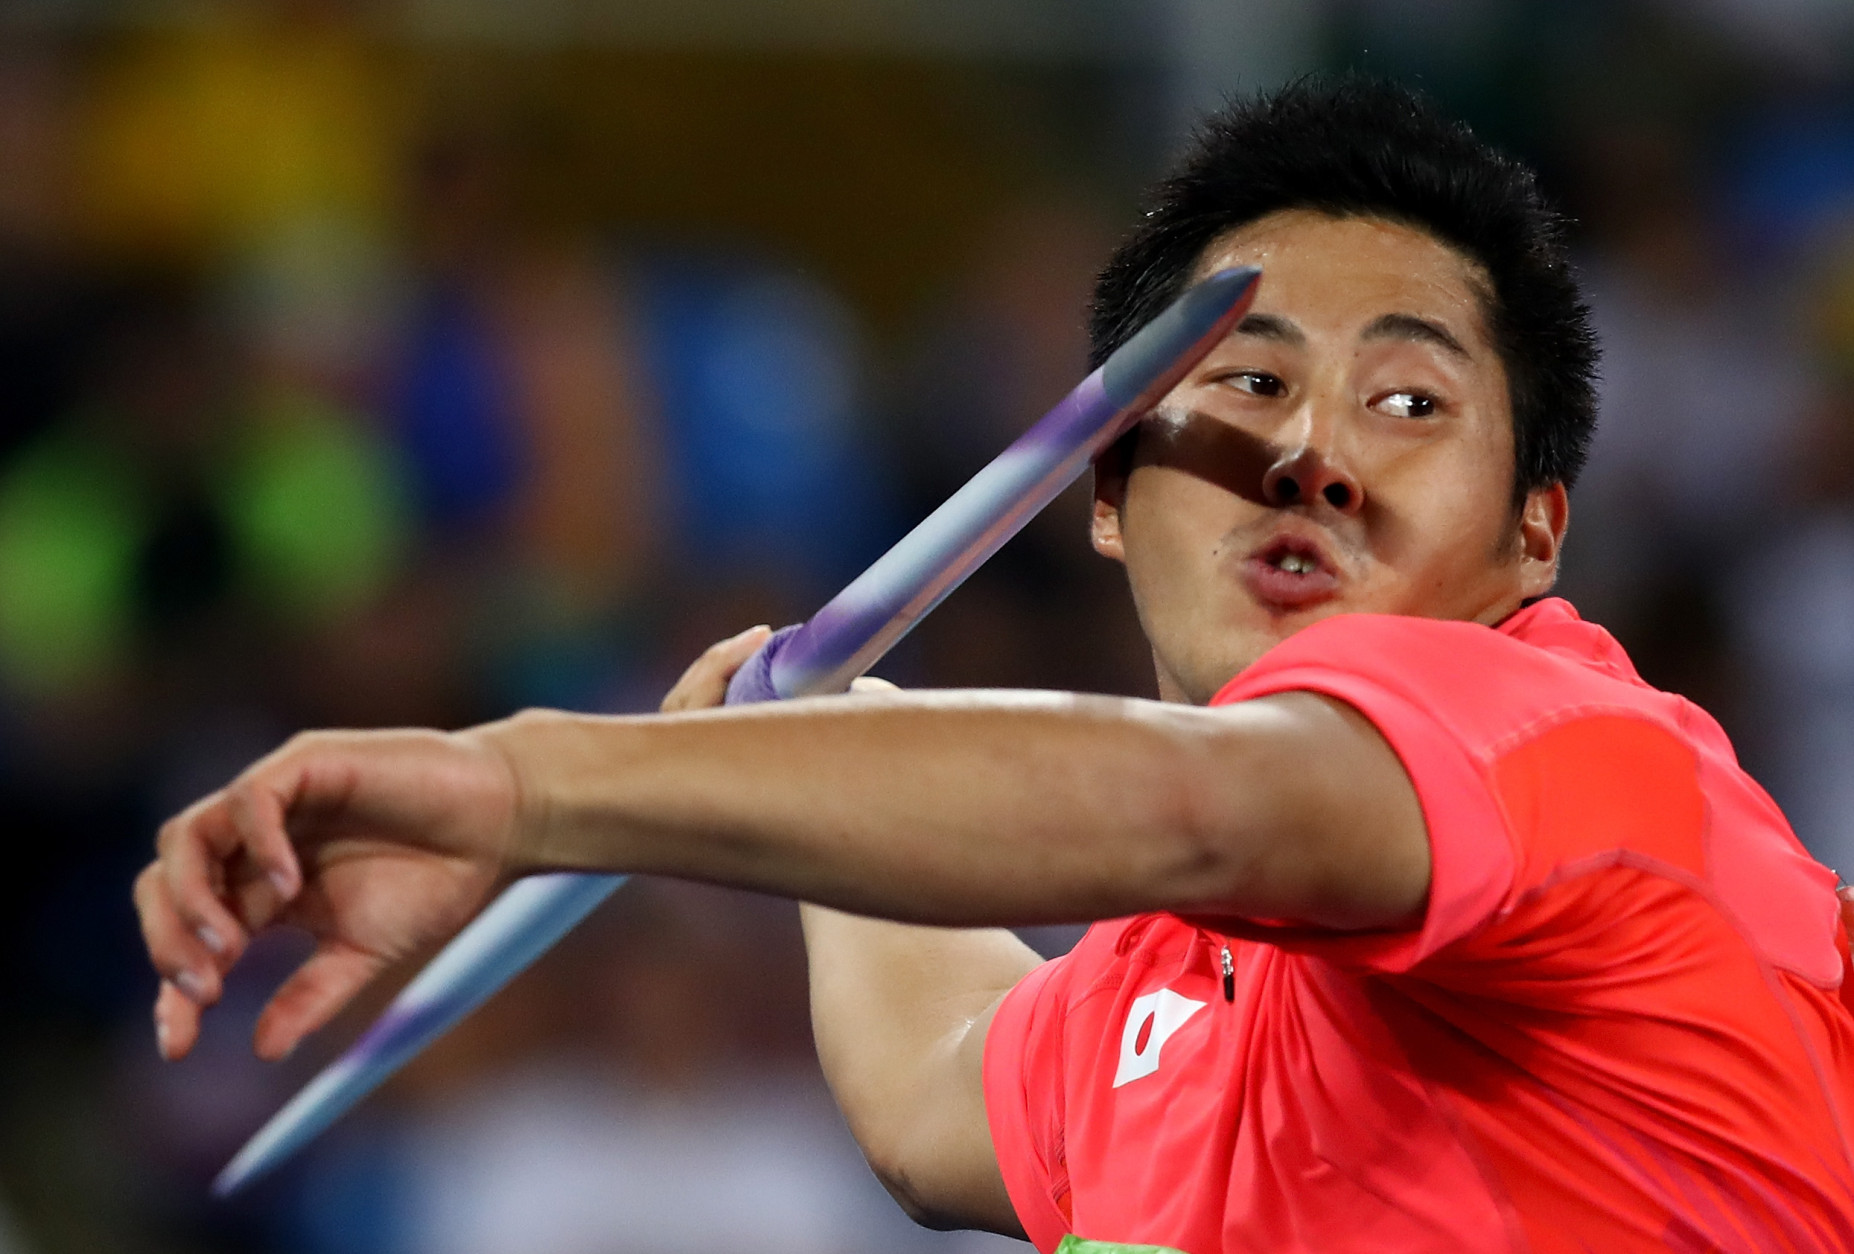 RIO DE JANEIRO, BRAZIL - AUGUST 20:  Ryohei Arai of Japan competes in the Men's Javelin final on Day 15 of the Rio 2016 Olympic Games at the Olympic Stadium on August 20, 2016 in Rio de Janeiro, Brazil.  (Photo by Alexander Hassenstein/Getty Images)